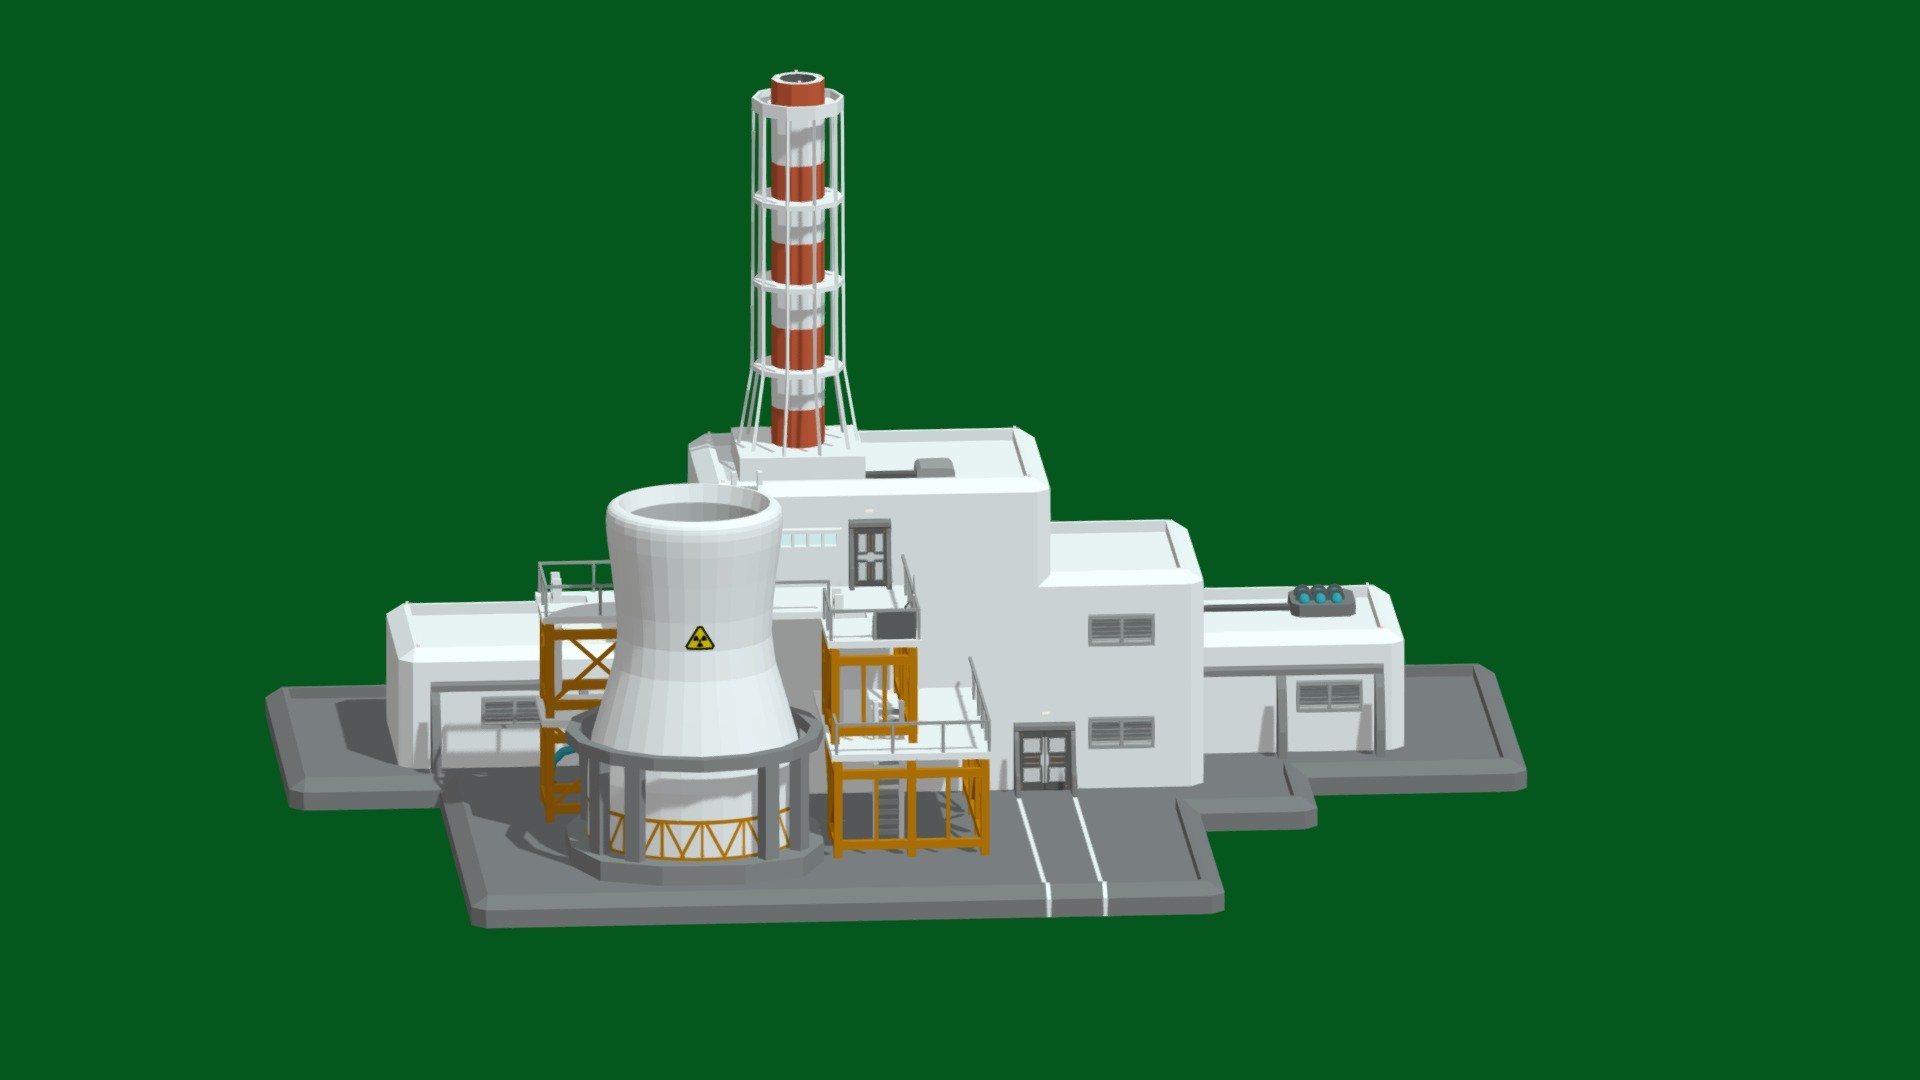 This is low-poly 3D model of nuclear station. Lenin Nuclear Power Station in Chernobyl is main reference of this model. Texture 4K (4096 X 4096 pixels) PNG format.

https://www.youtube.com/watch?v=iXV4ixX0n4E&amp;list=PLy0vYy2bpfuNGpJeoIwbNIGILu-sxJ-1e&amp;index=2

https://www.youtube.com/watch?v=F9WJhbaH62Q&amp;list=PLy0vYy2bpfuNGpJeoIwbNIGILu-sxJ-1e - Nuclear Station - 3D model by Ohorodnichuk (@Ogorodnichuk) 3d model